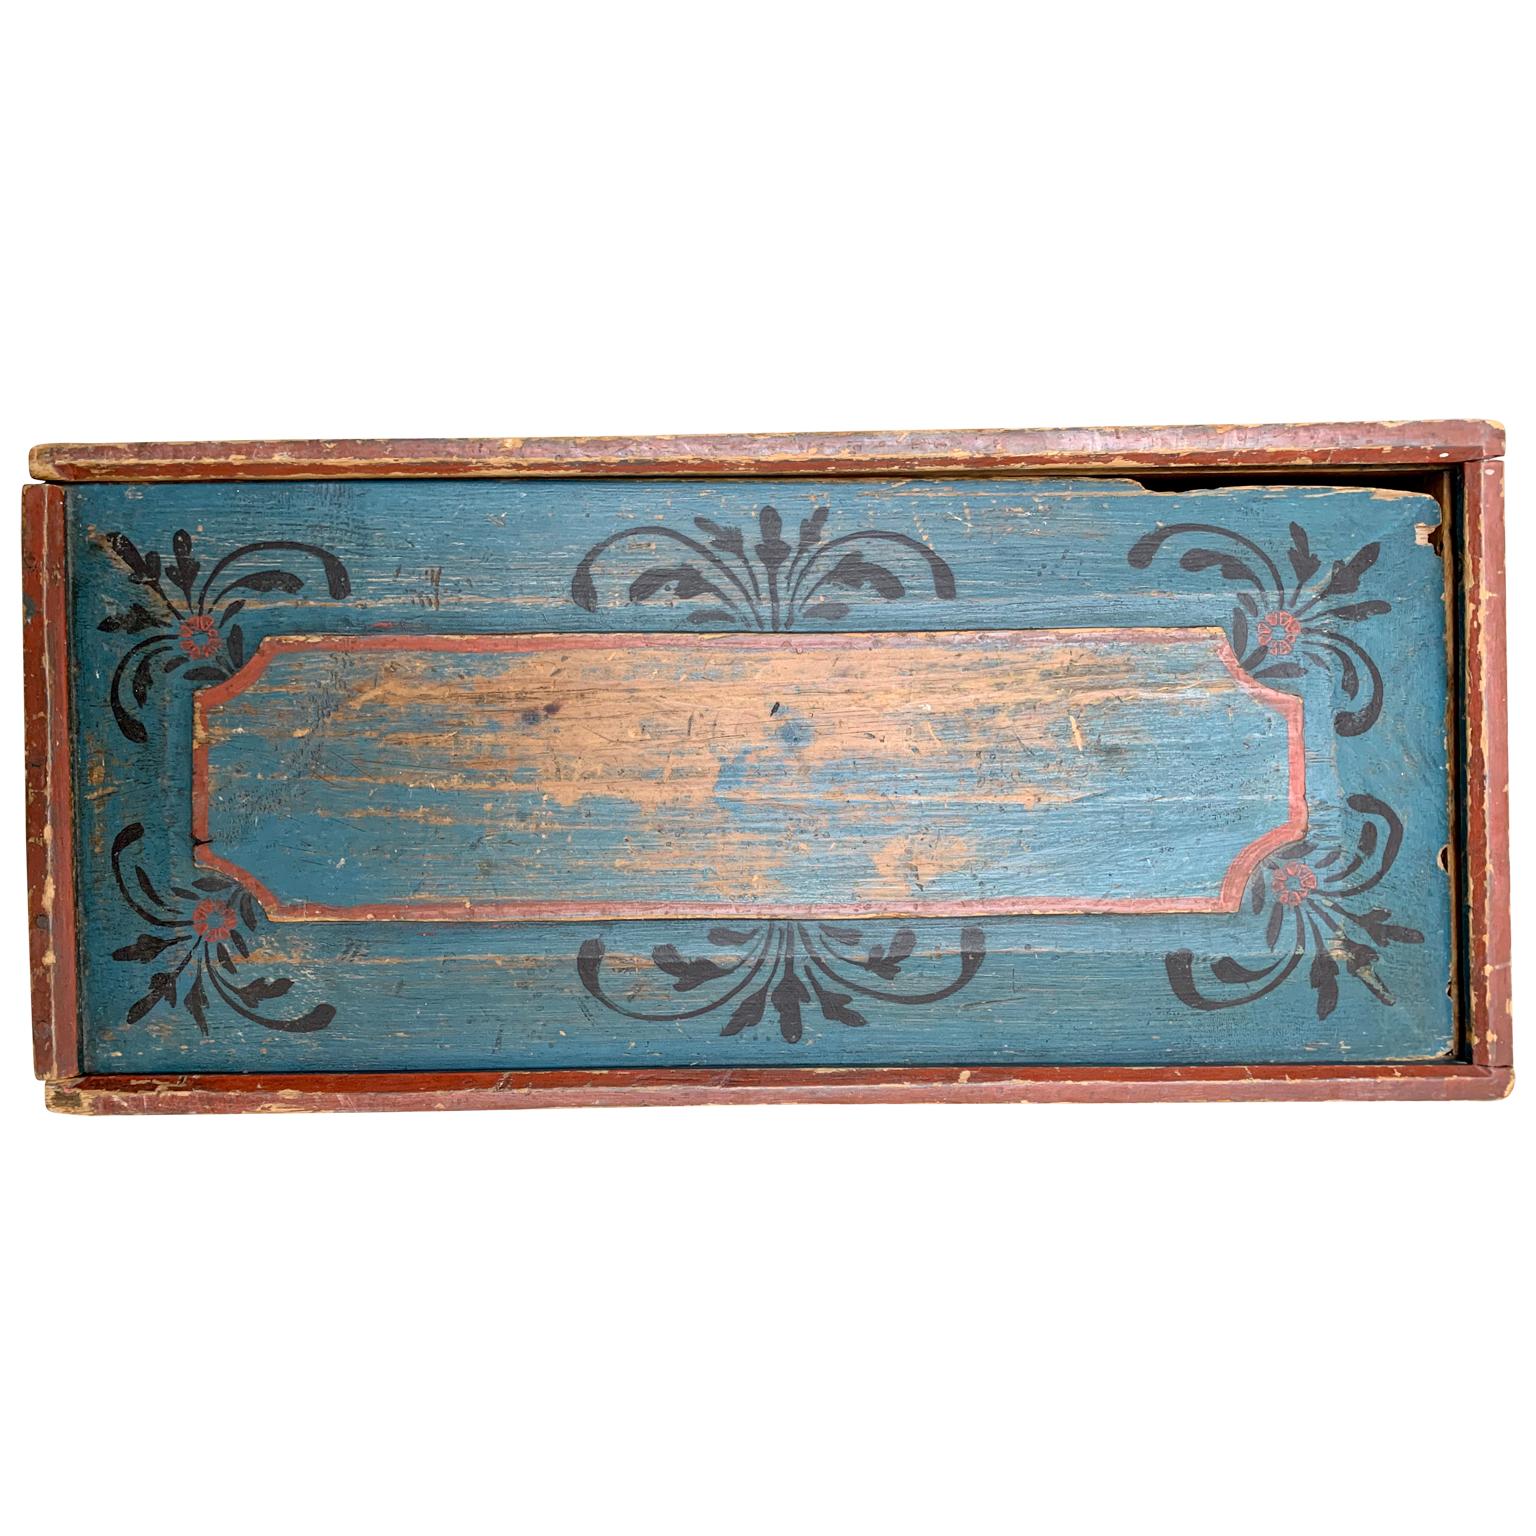 Original Blue and Red Painted Swedish Bridal Folk Art Box Dated 1852 In Good Condition In Haddonfield, NJ